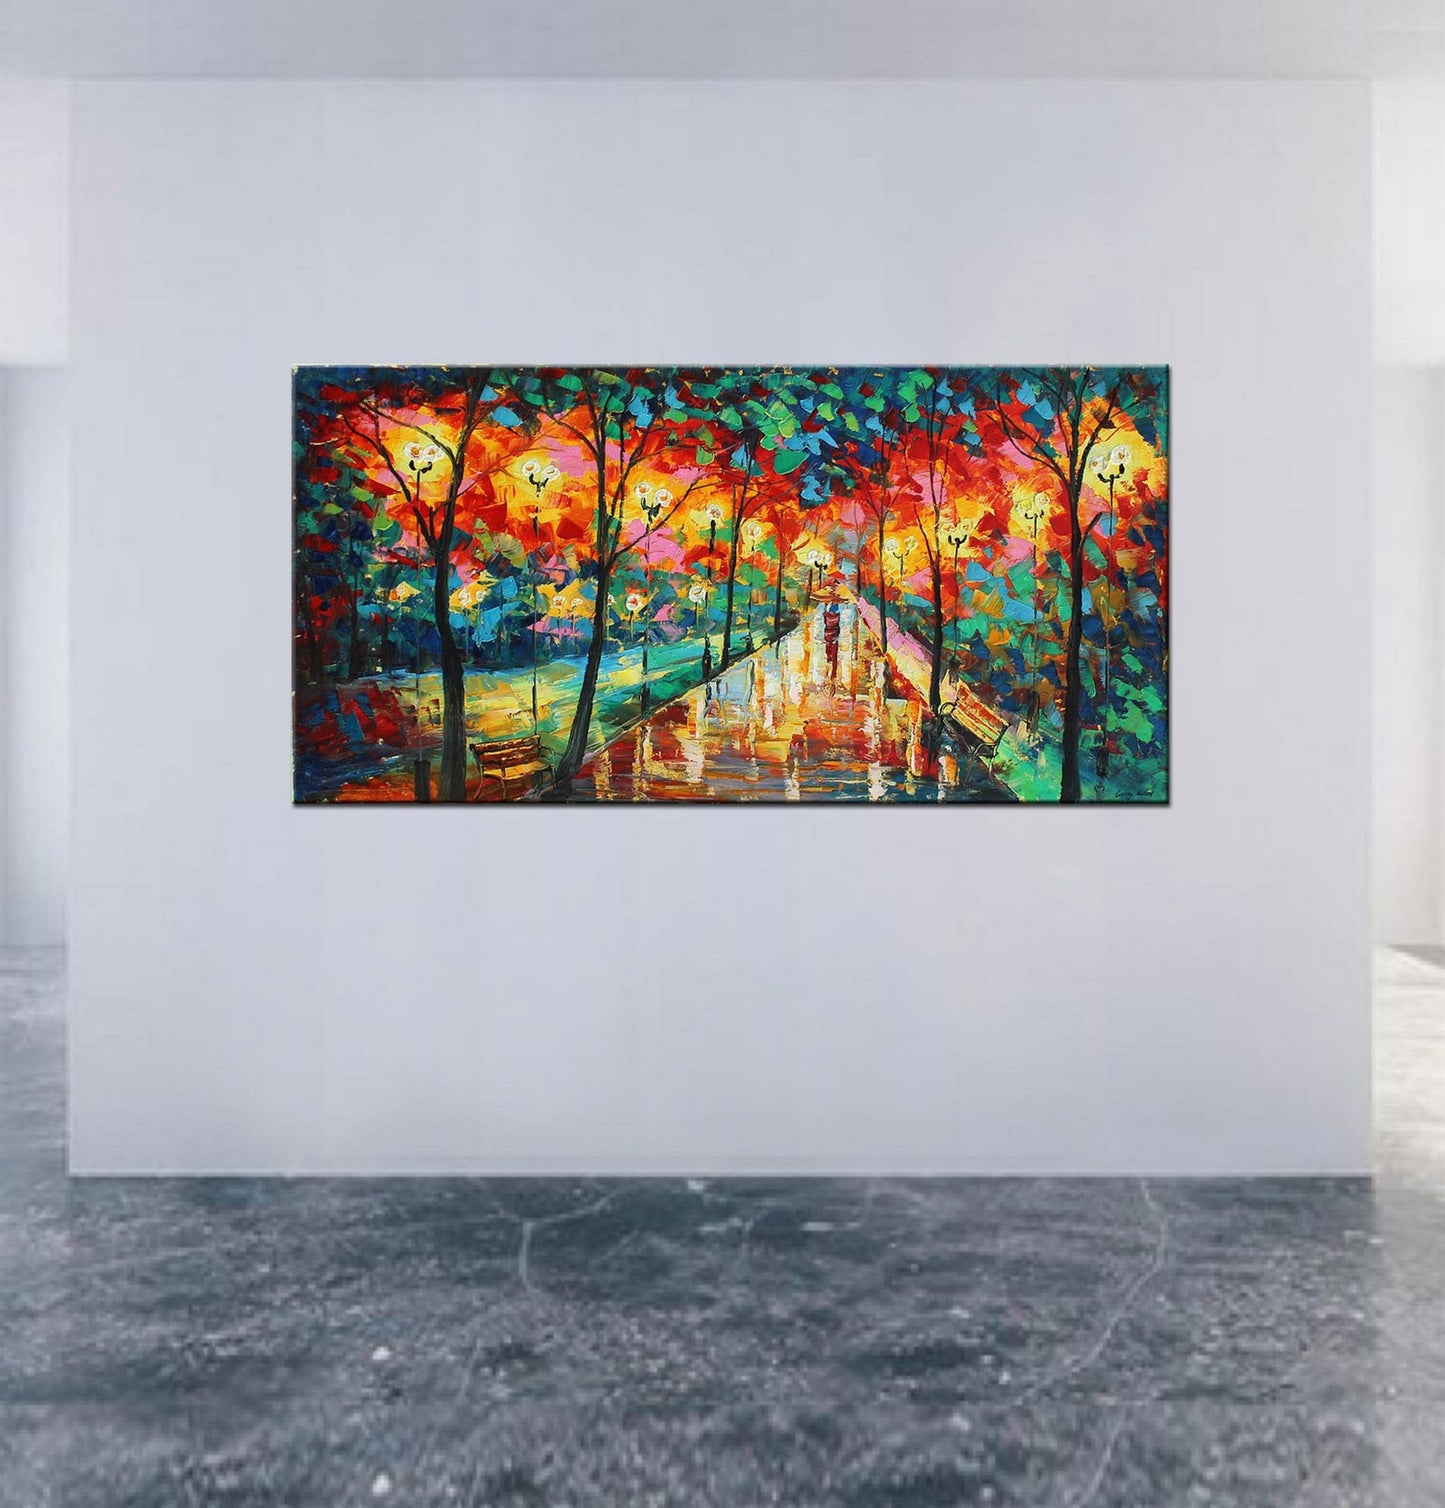 Oil Painting Landscape Avenue At Night, Canvas Painting, Wall Art Painting, Abstract Landscape, Extra Large Wall Art, Palette Knife Art